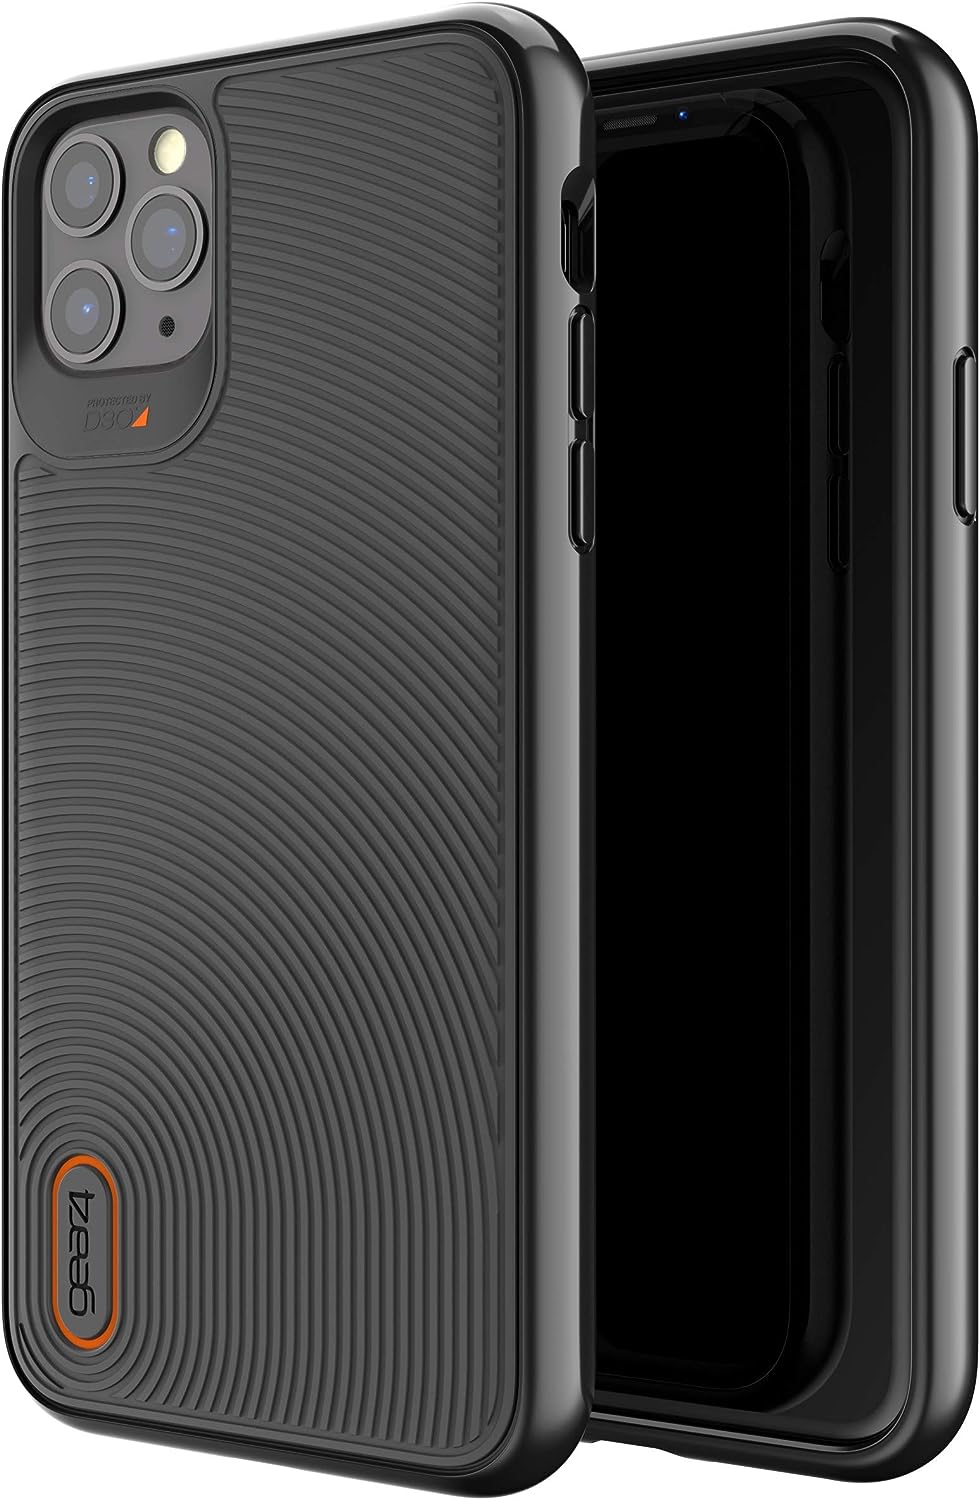 Gear4 Battersea Case for iPhone 11 Pro Max, Advanced Impact Protection - Black